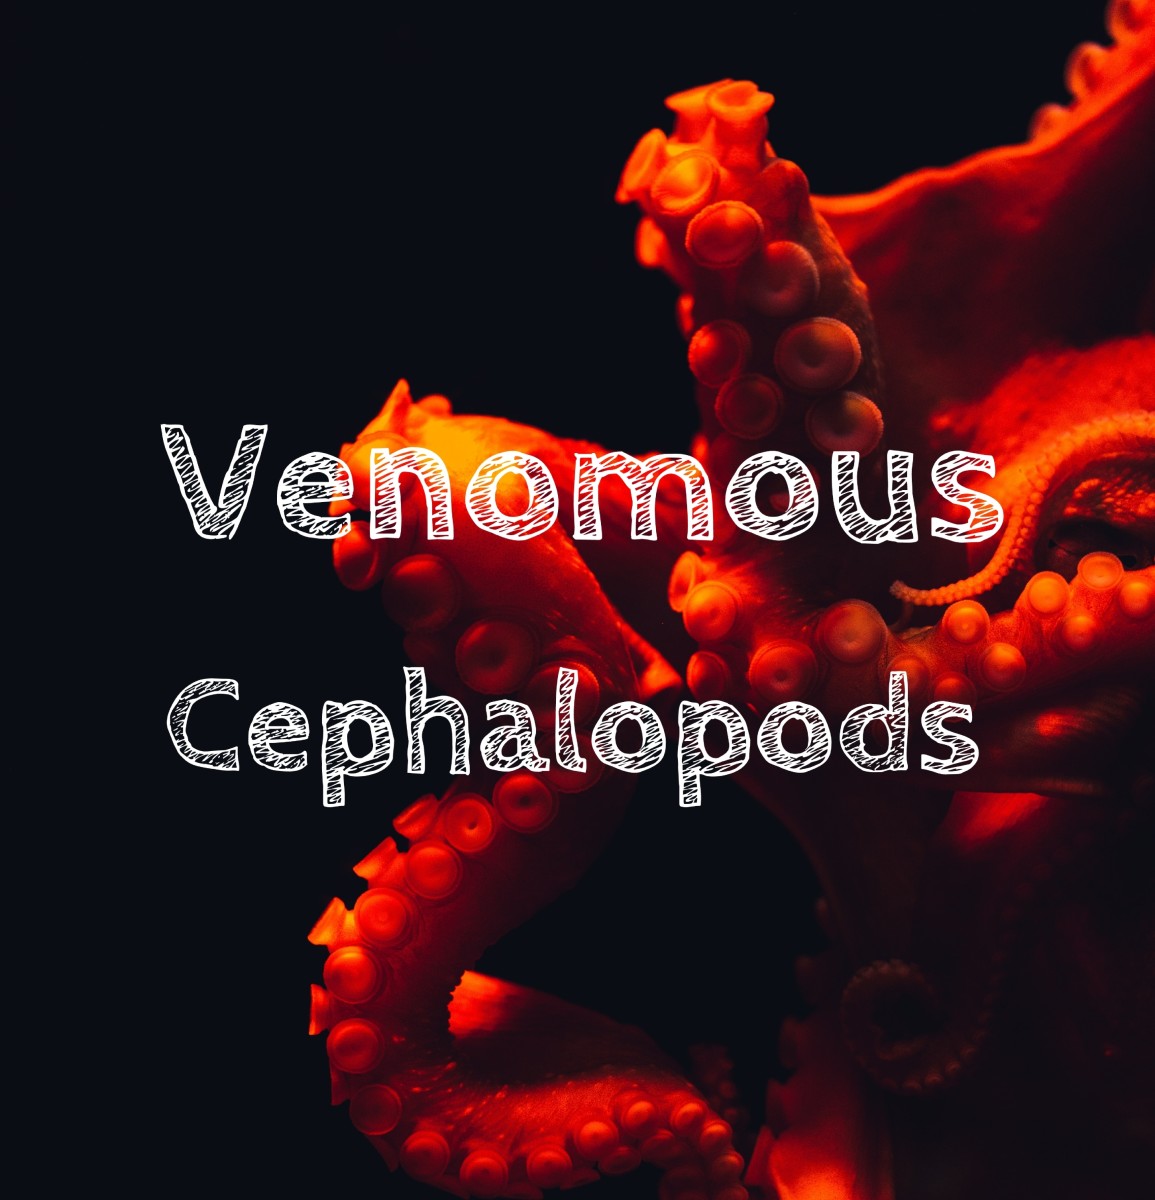 Flamboyant Cuttlefish and Blue-Ringed Octopus Facts